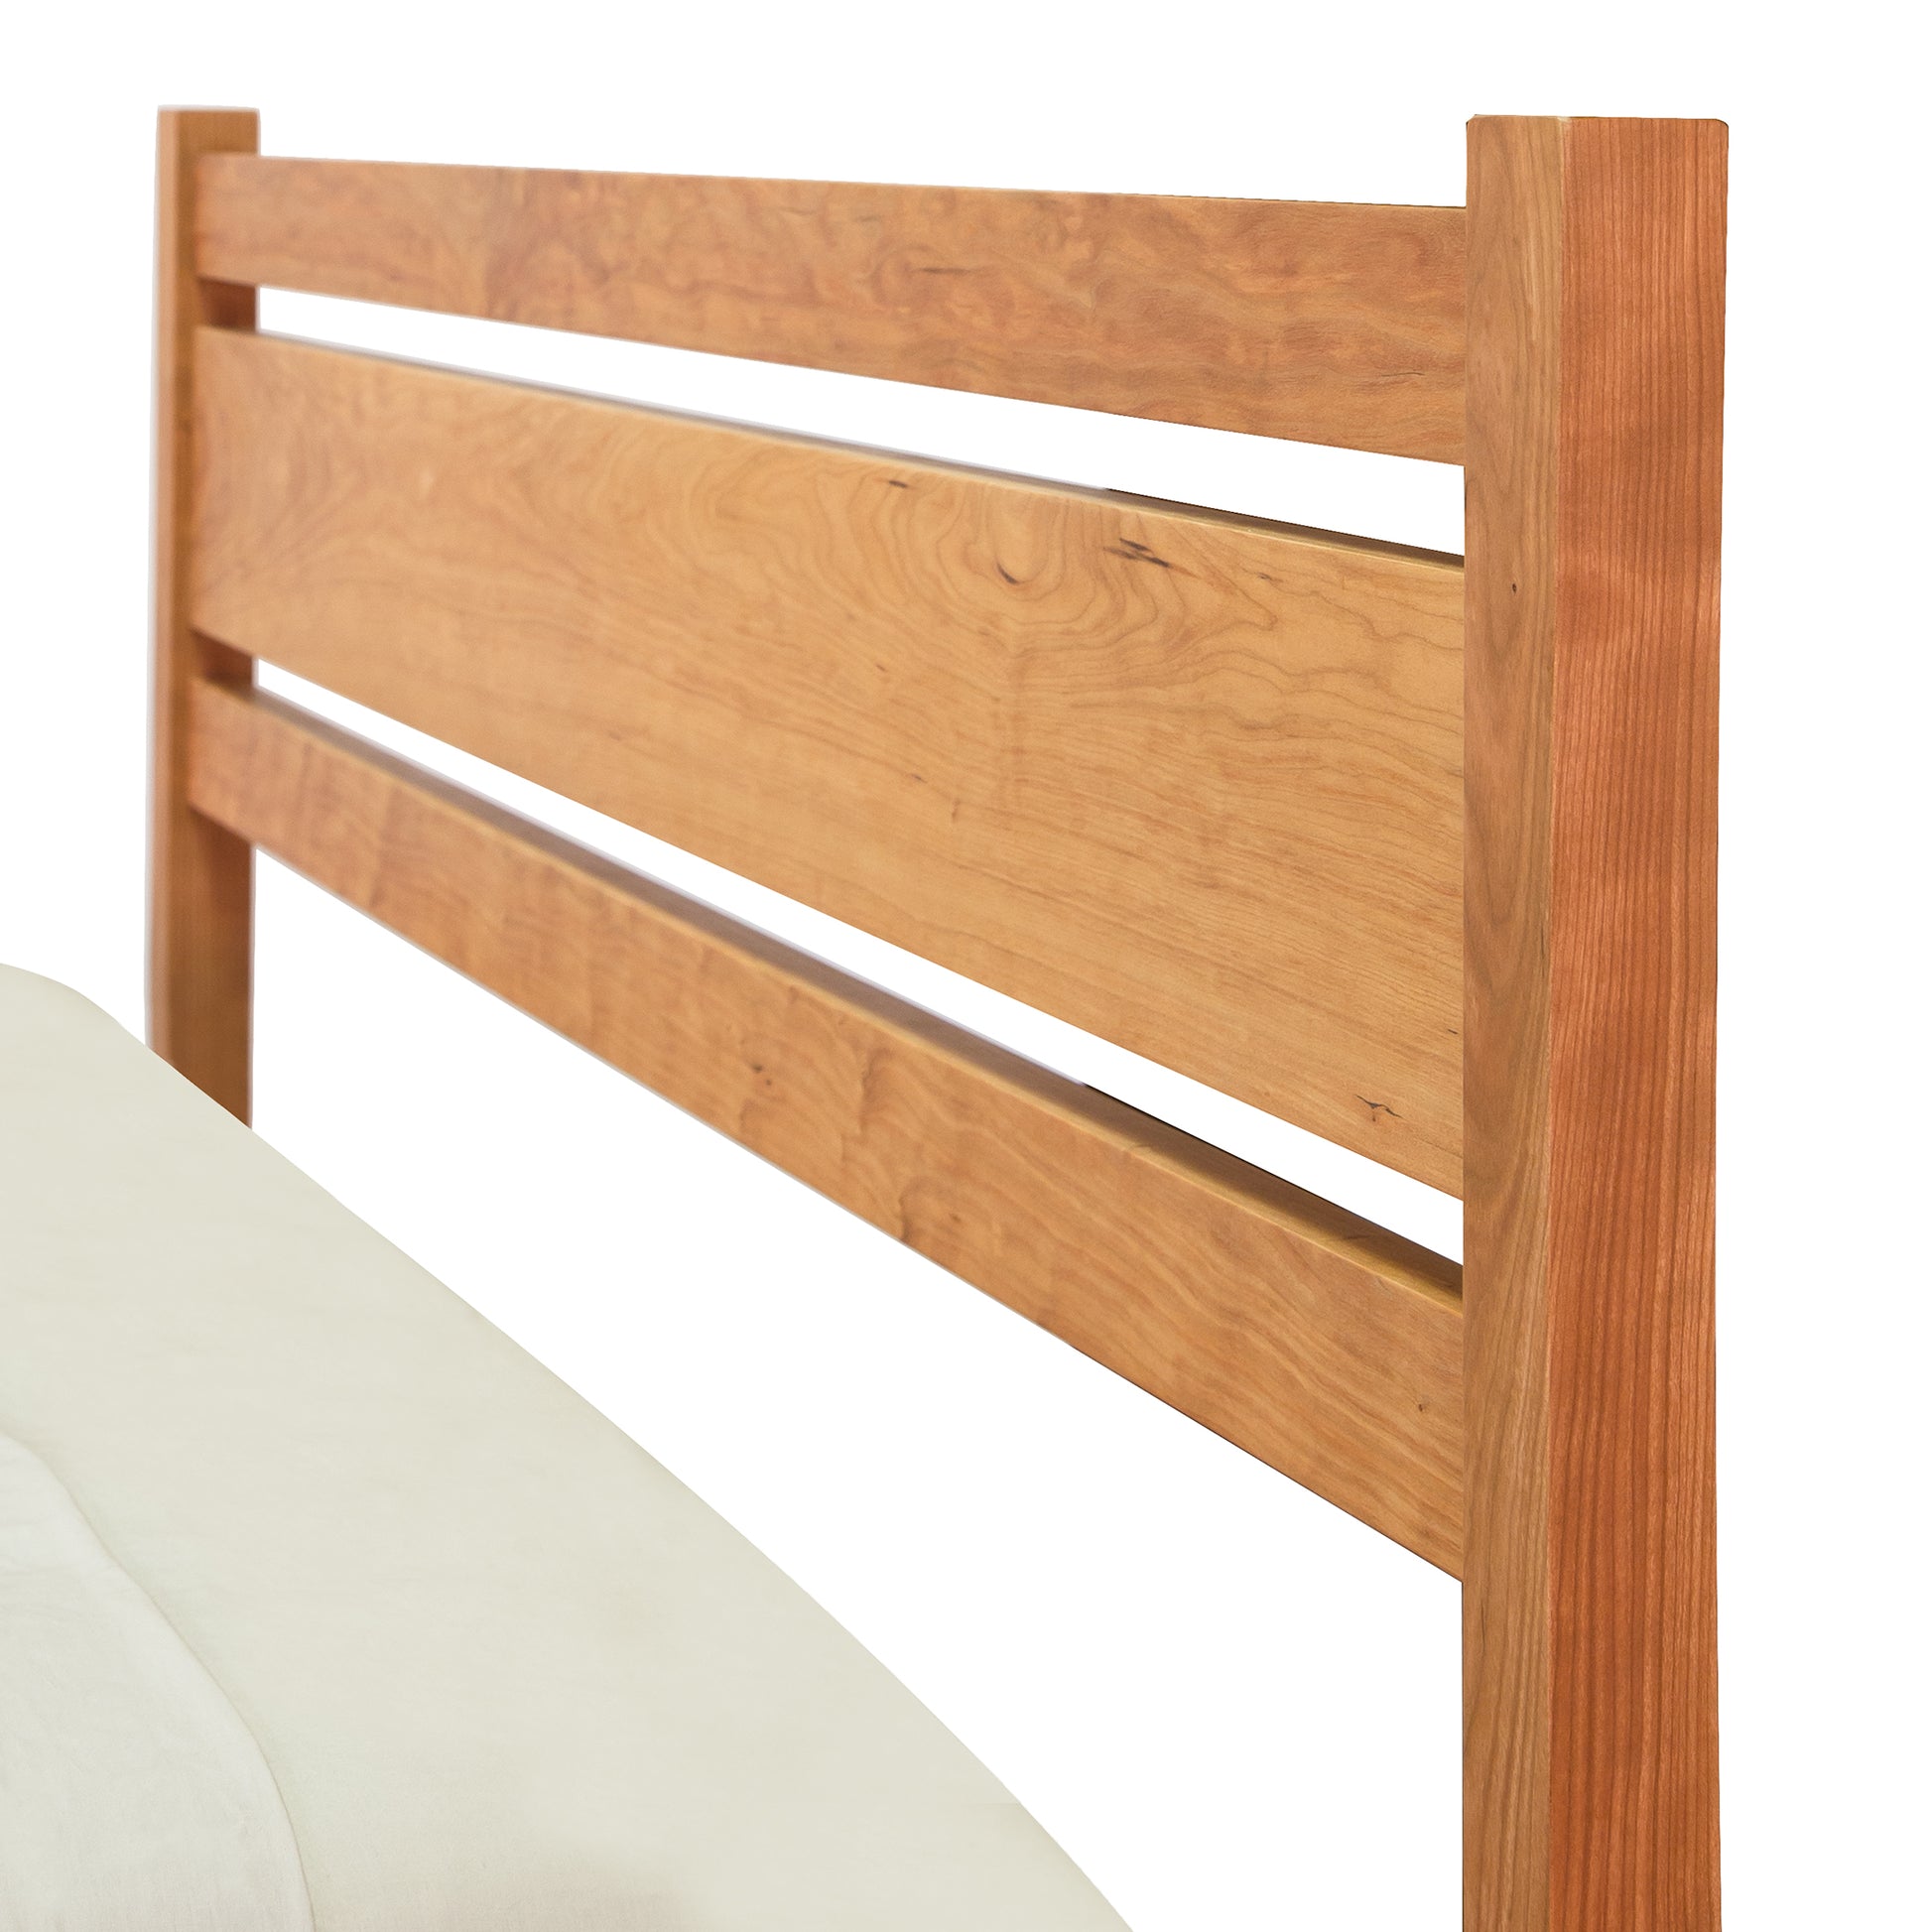 A Vermont Furniture Designs Horizon Platform Bed featuring Arts and Crafts styling, with a wooden headboard and a white sheet.